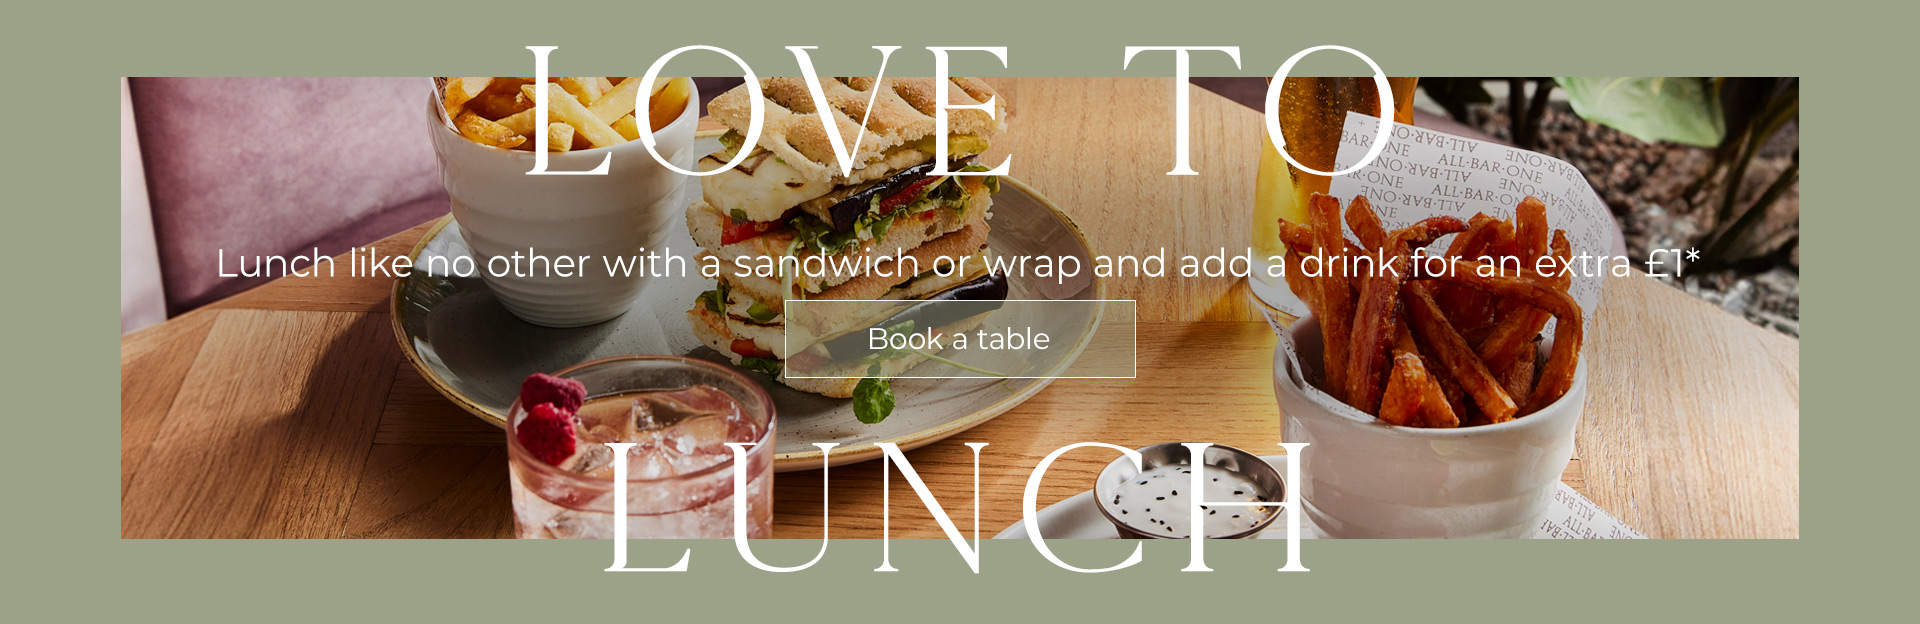 Lunch Offer at All Bar One Cambridge